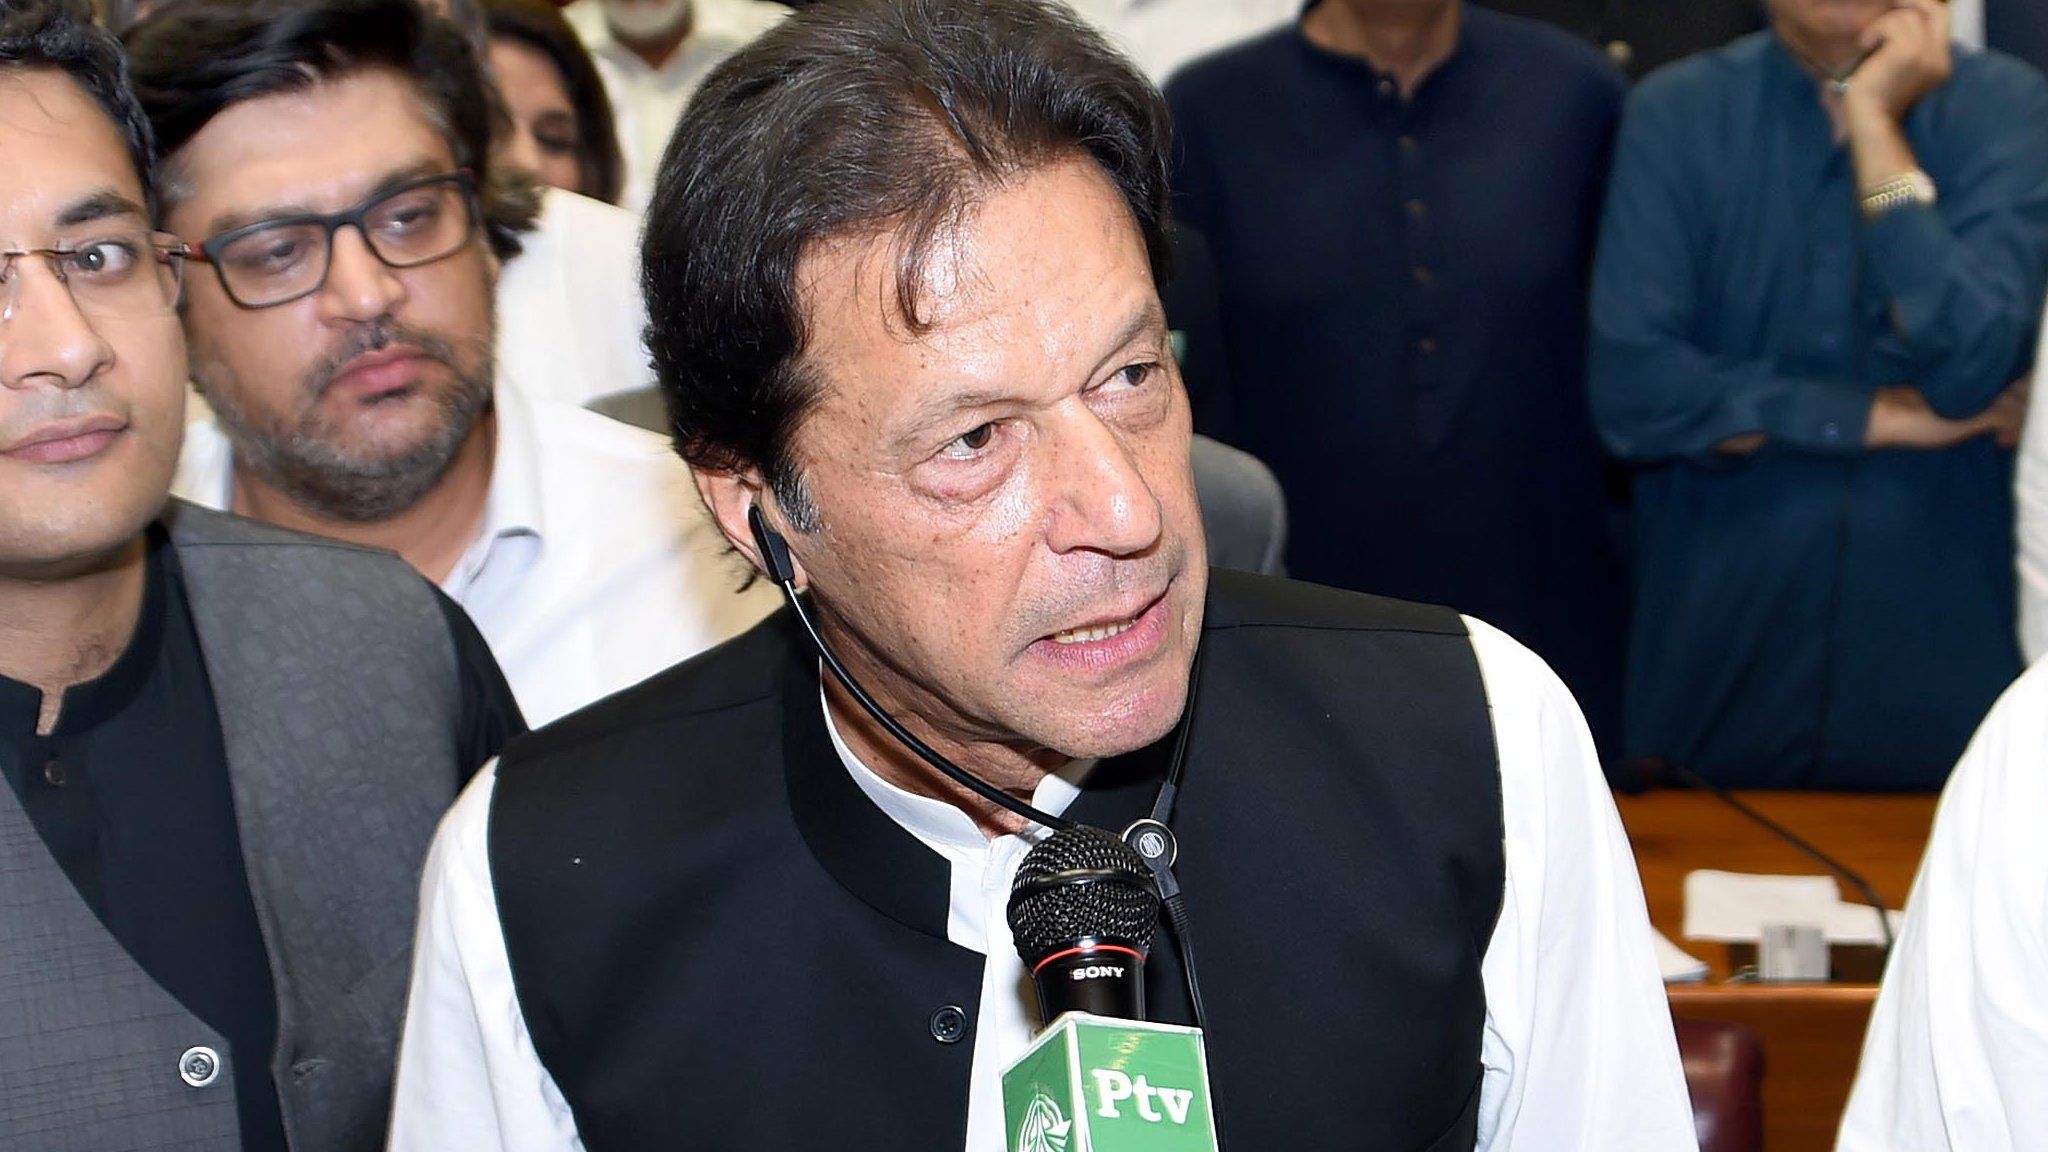 Imran Khan at a session of the National assembly in Islamabad, Pakistan, 17 August 2018